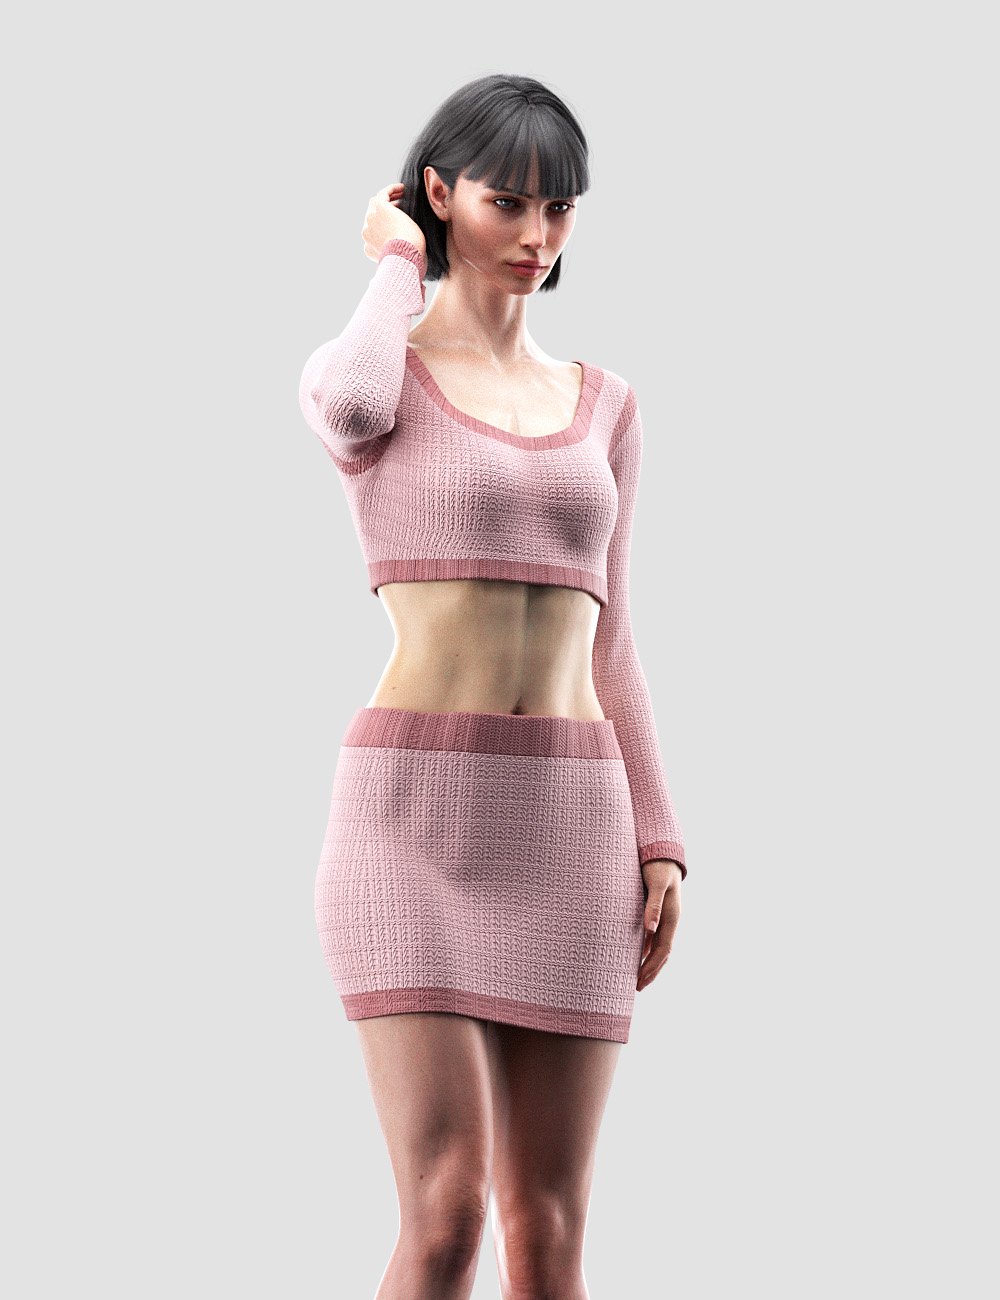 dForce Rose Knit Outfit for Genesis 9 by: Romeo, 3D Models by Daz 3D